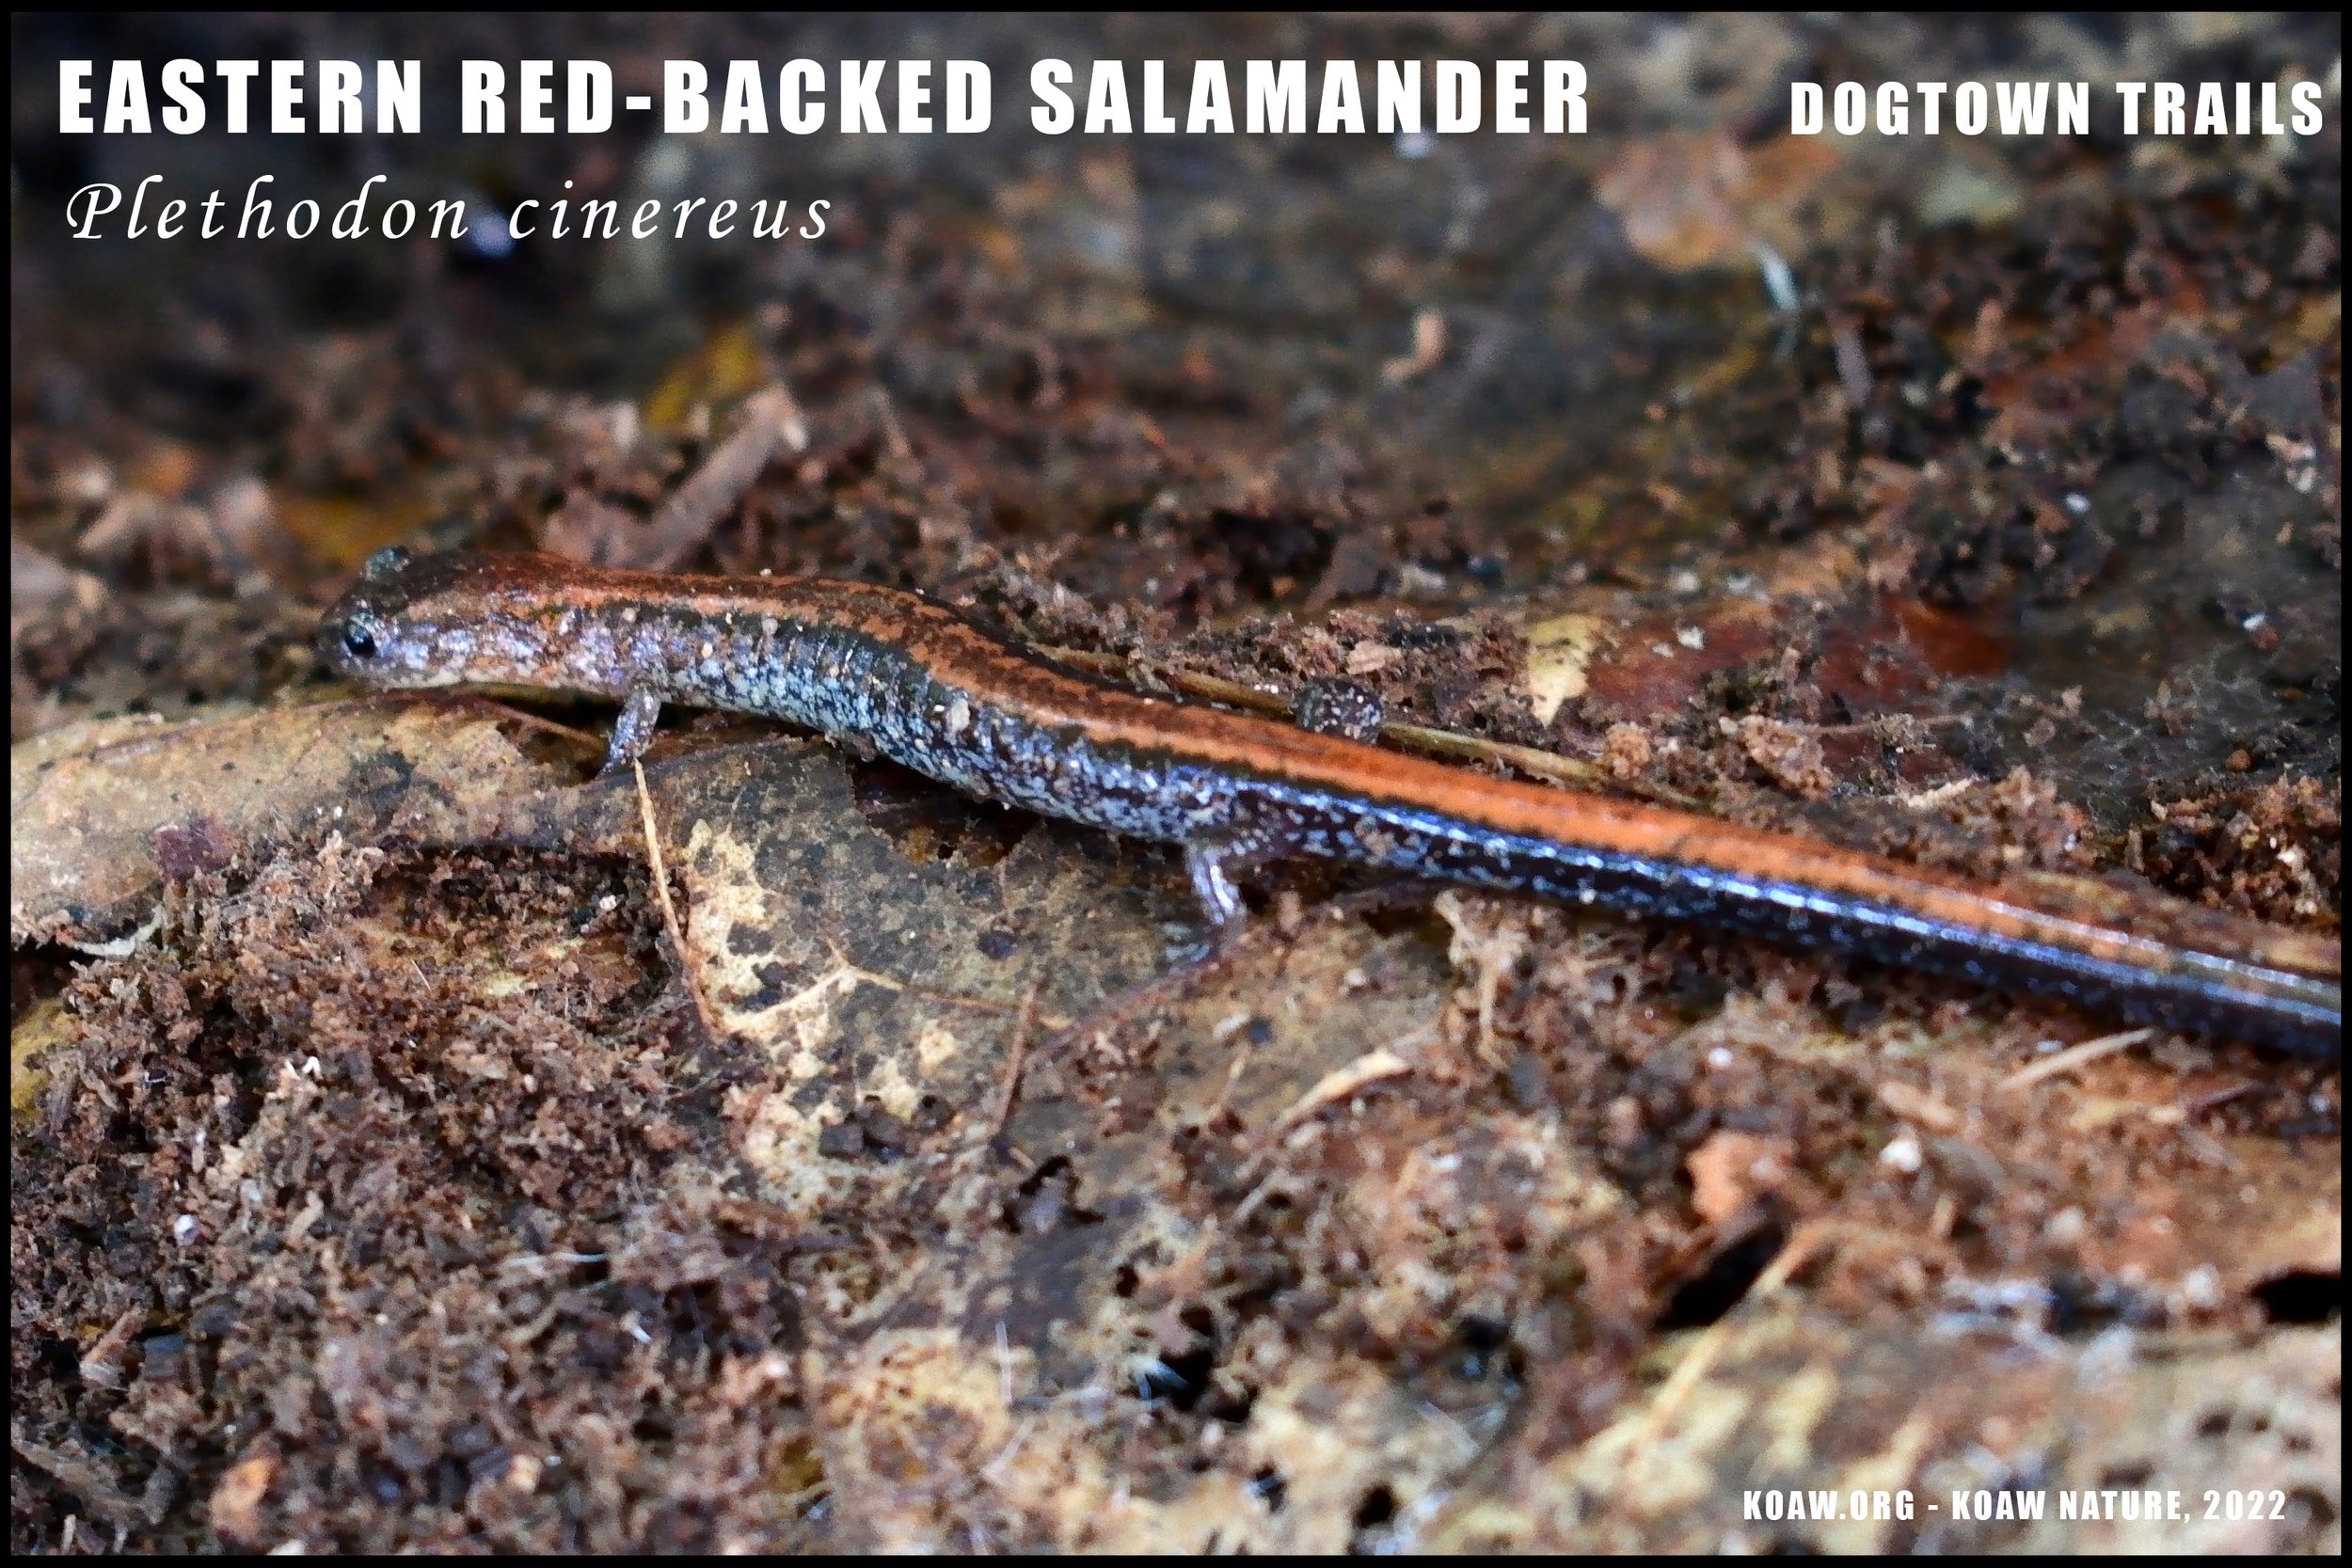 Eastern Red-Backed Salamander at Dogtown